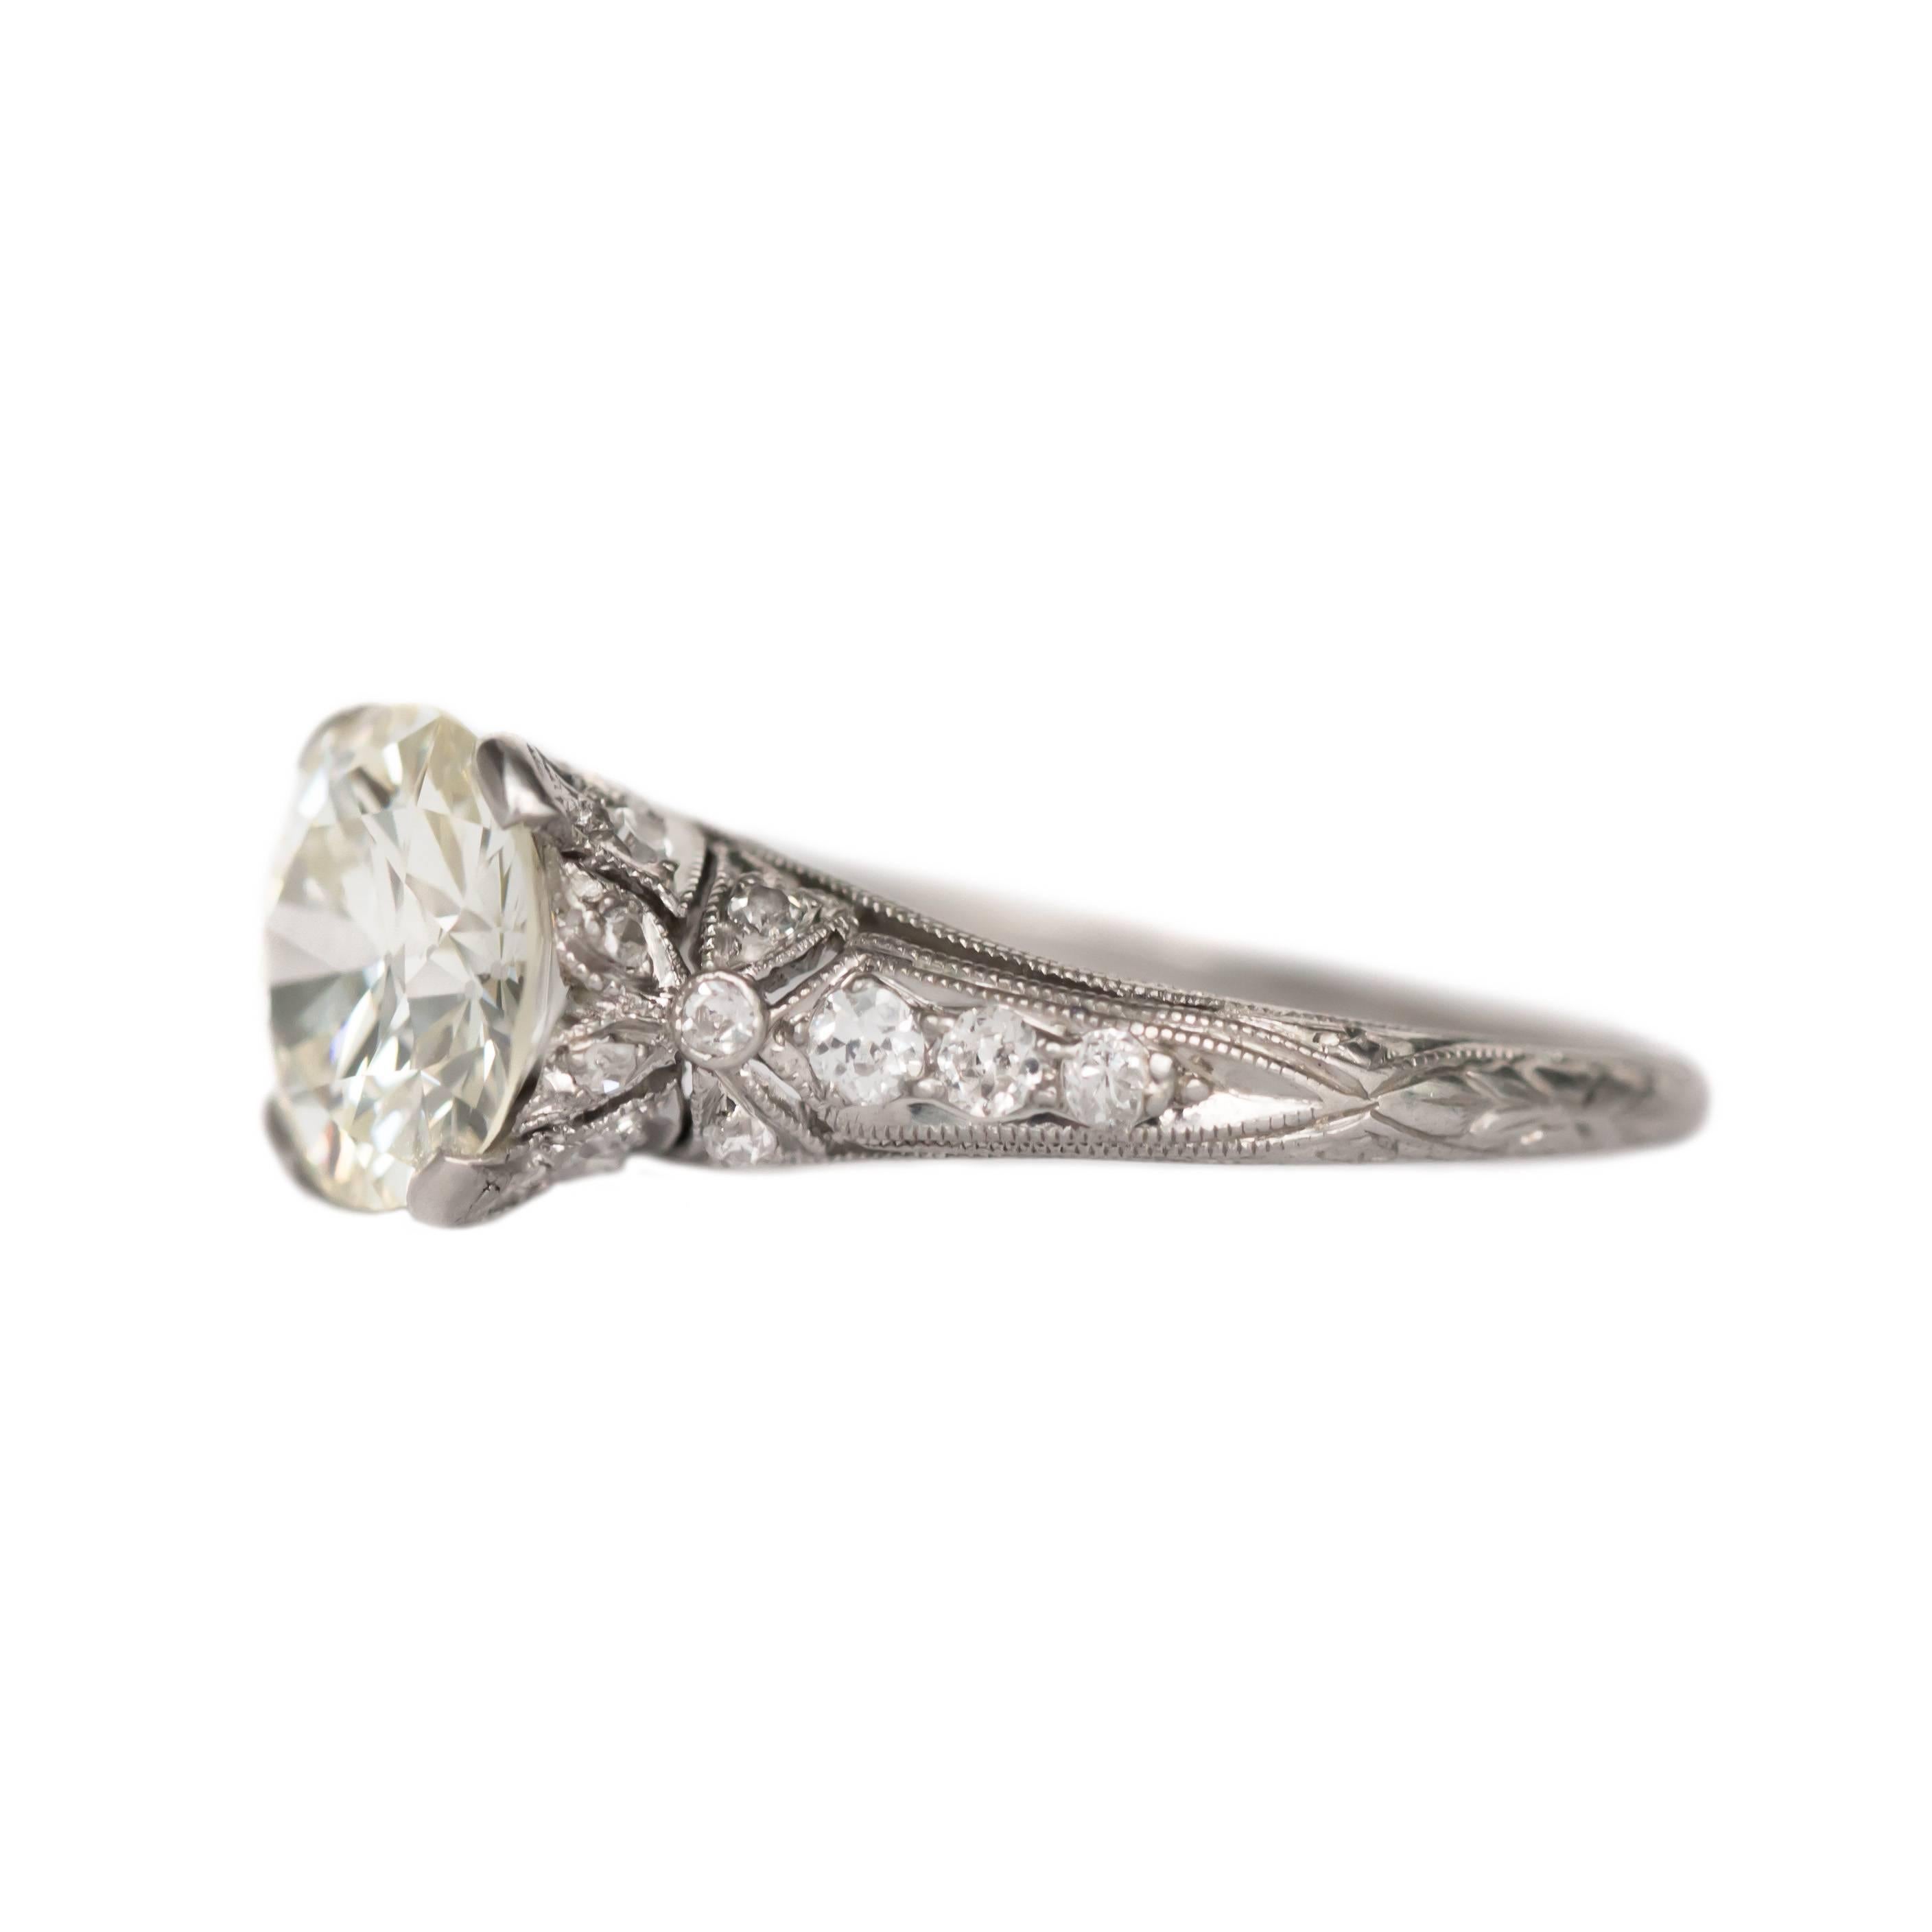 Ring Size: 5.75
Metal Type: Platinum
Weight: 3.3 grams

Center Diamond Details
Shape: Old European
Carat Weight: 1.58 carat
Color: L
Clarity: VS1

Side Stone Details: 
Shape: Antique Single Cut
Total Carat Weight: .20 carat, total weight
Color: